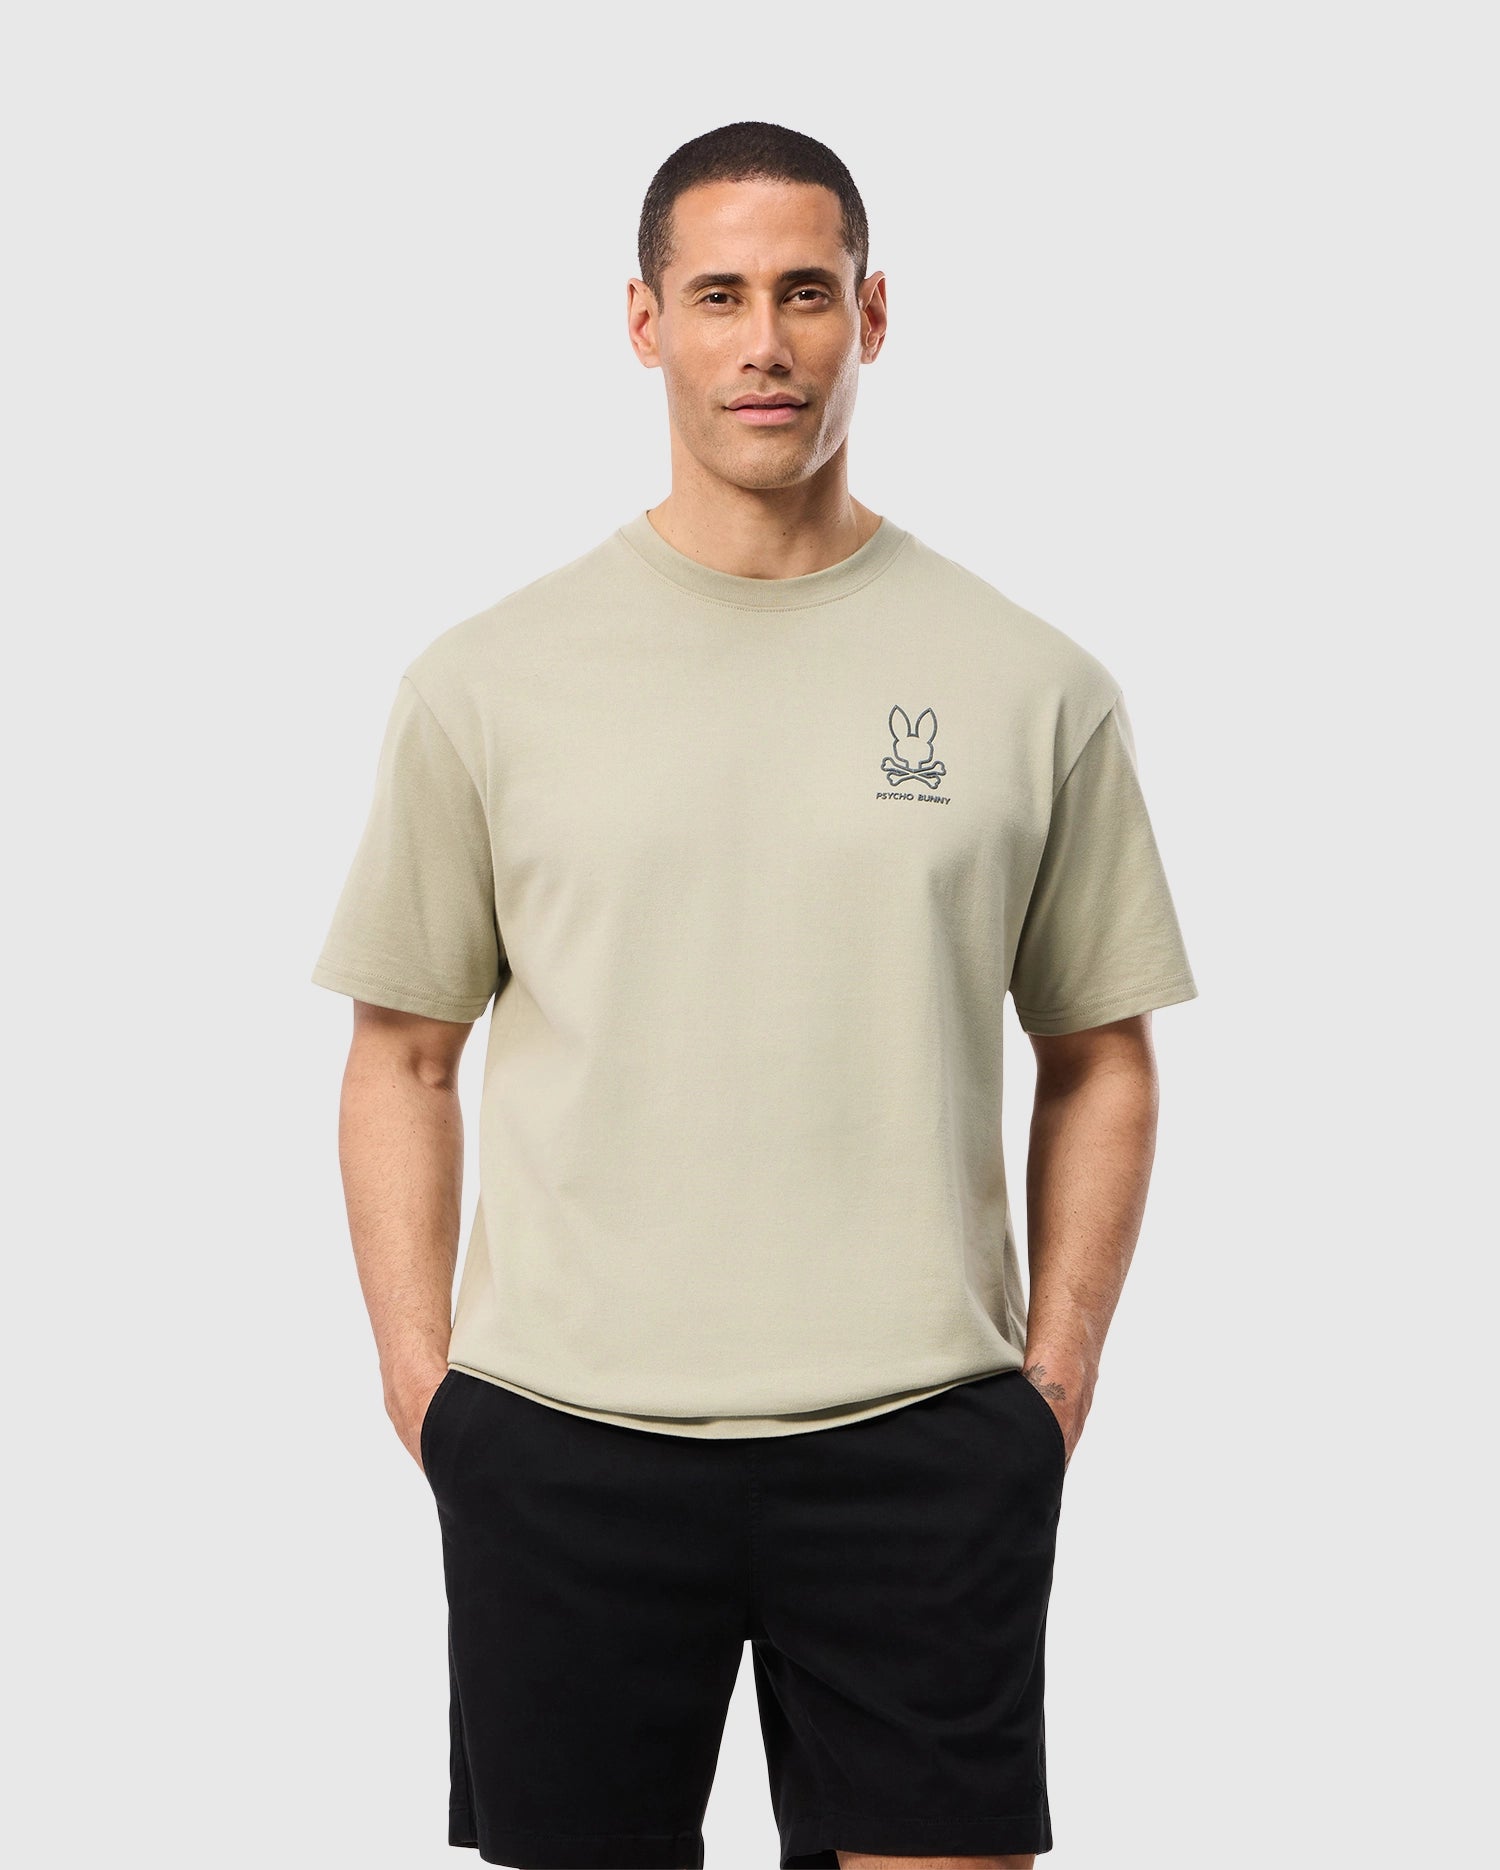 A man stands confidently with his hands in his pockets, wearing a Psycho Bunny MENS BARRETT RELAXED FIT TEE - B6U518C200, a light beige T-shirt made of heavyweight Pima cotton, featuring a small Bunny graphic above his left chest and black shorts. He has short hair and a neutral expression, posed against a plain light grey background.